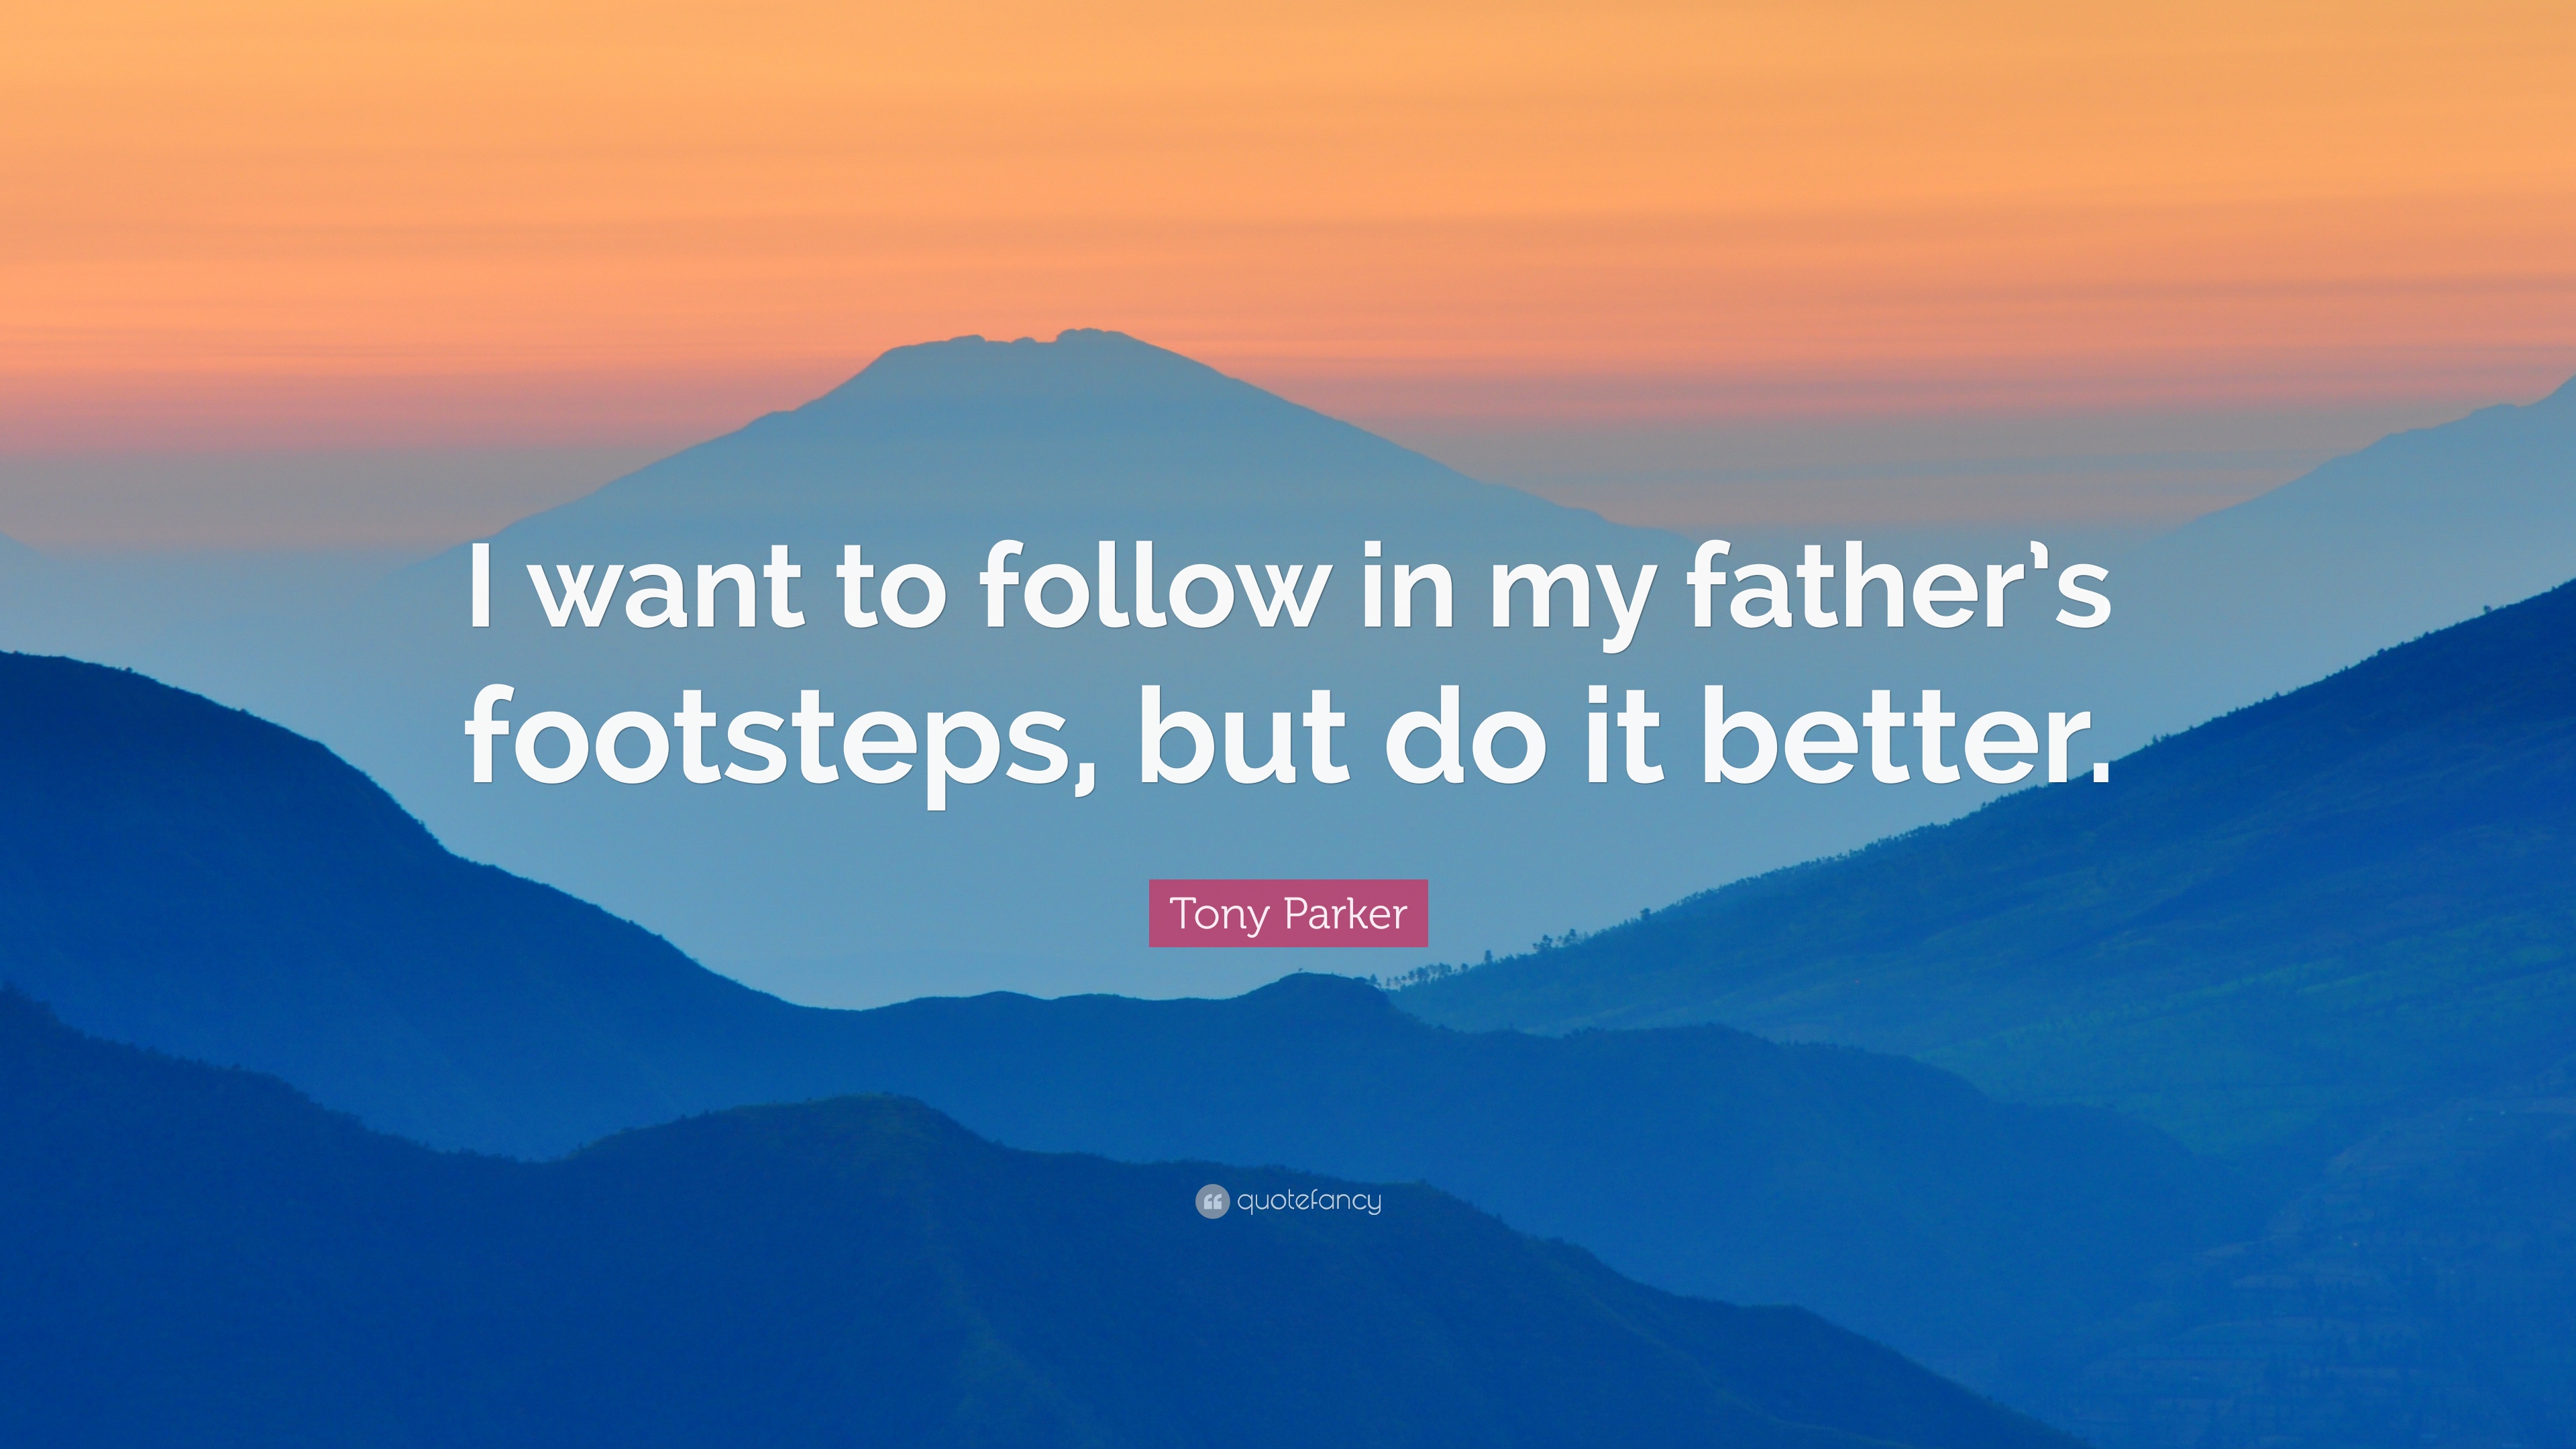 Tony Parker Quote: “I want to follow in my father's footsteps, but ...